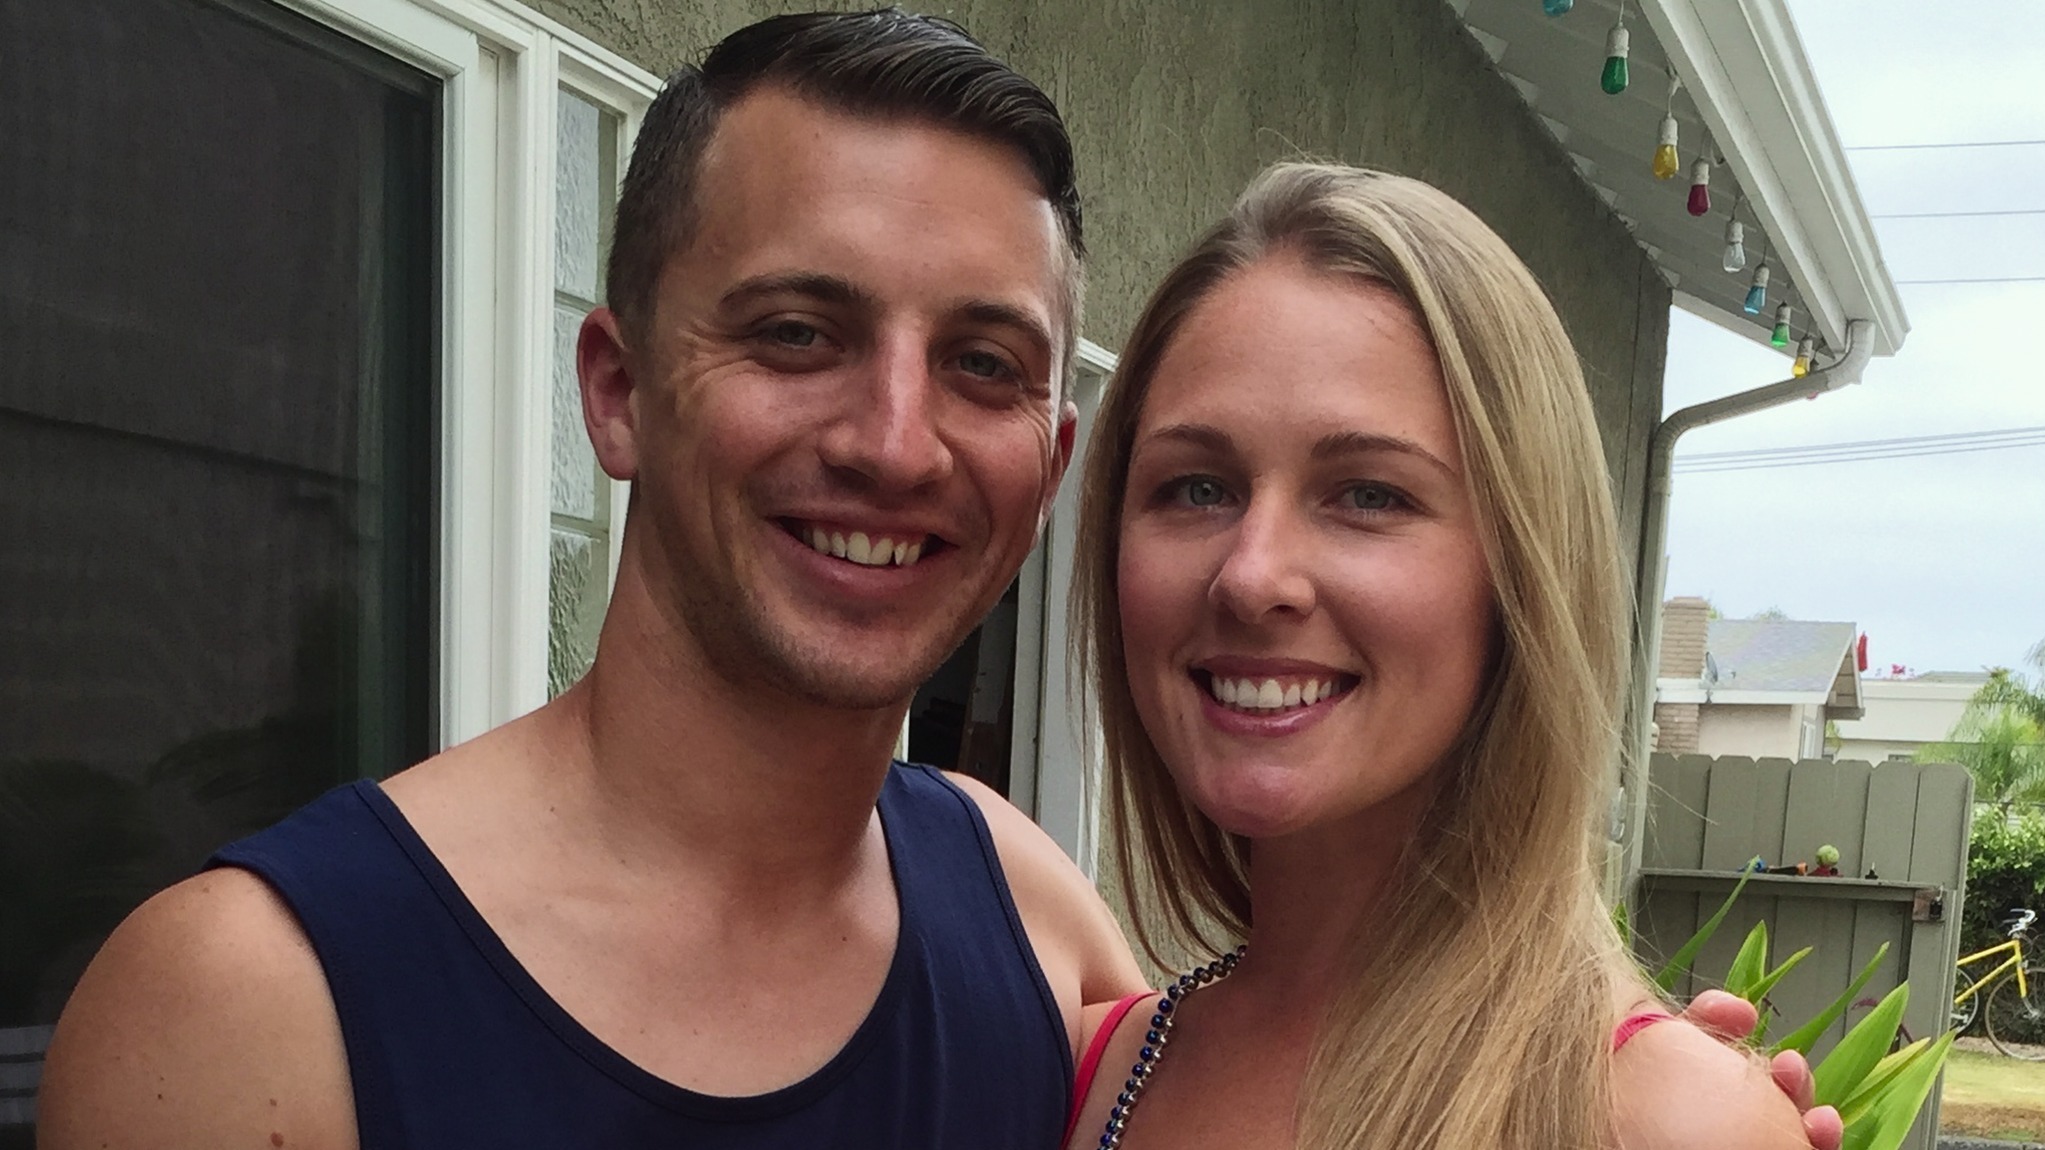 A young attractive man and woman stand close together and smiling outside a home.